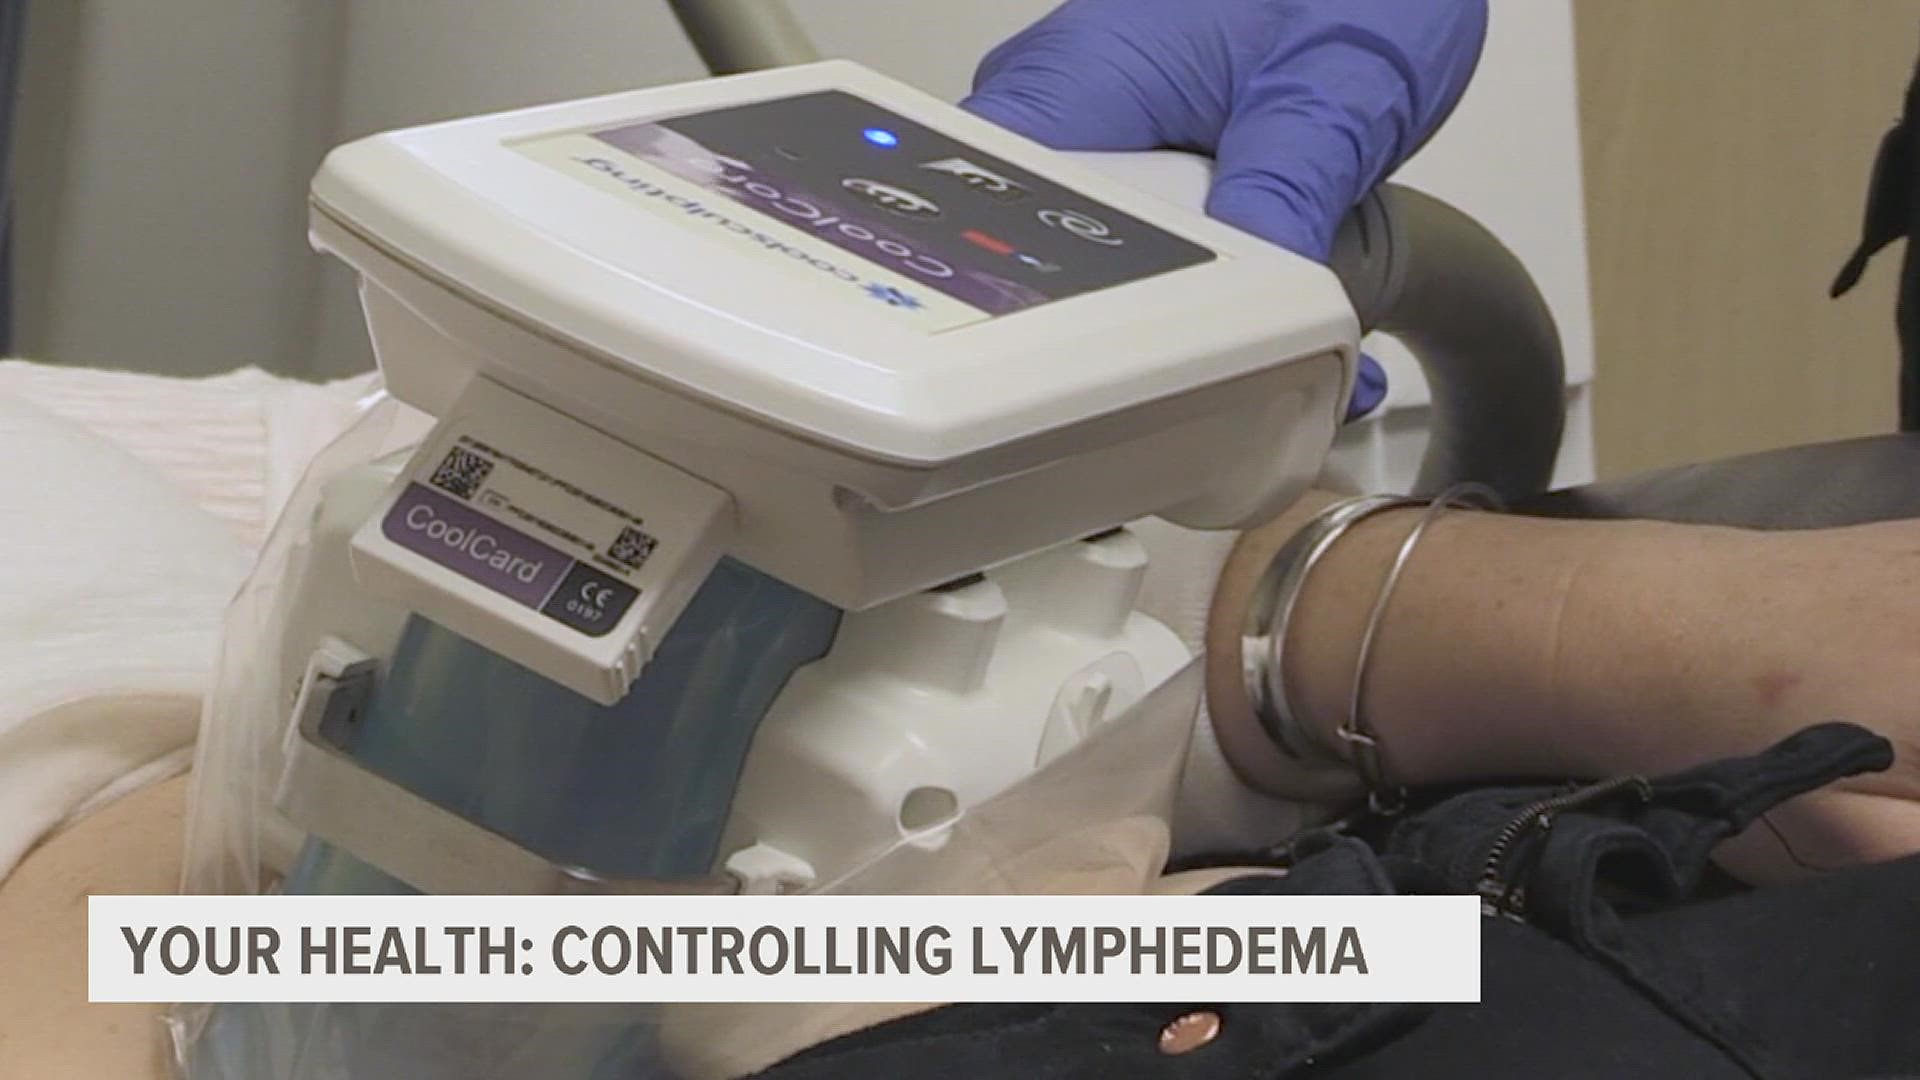 Lymphedema is a condition where fluid gets trapped in an arm or leg and causes swelling. Now, surgeons have better options for some patients.